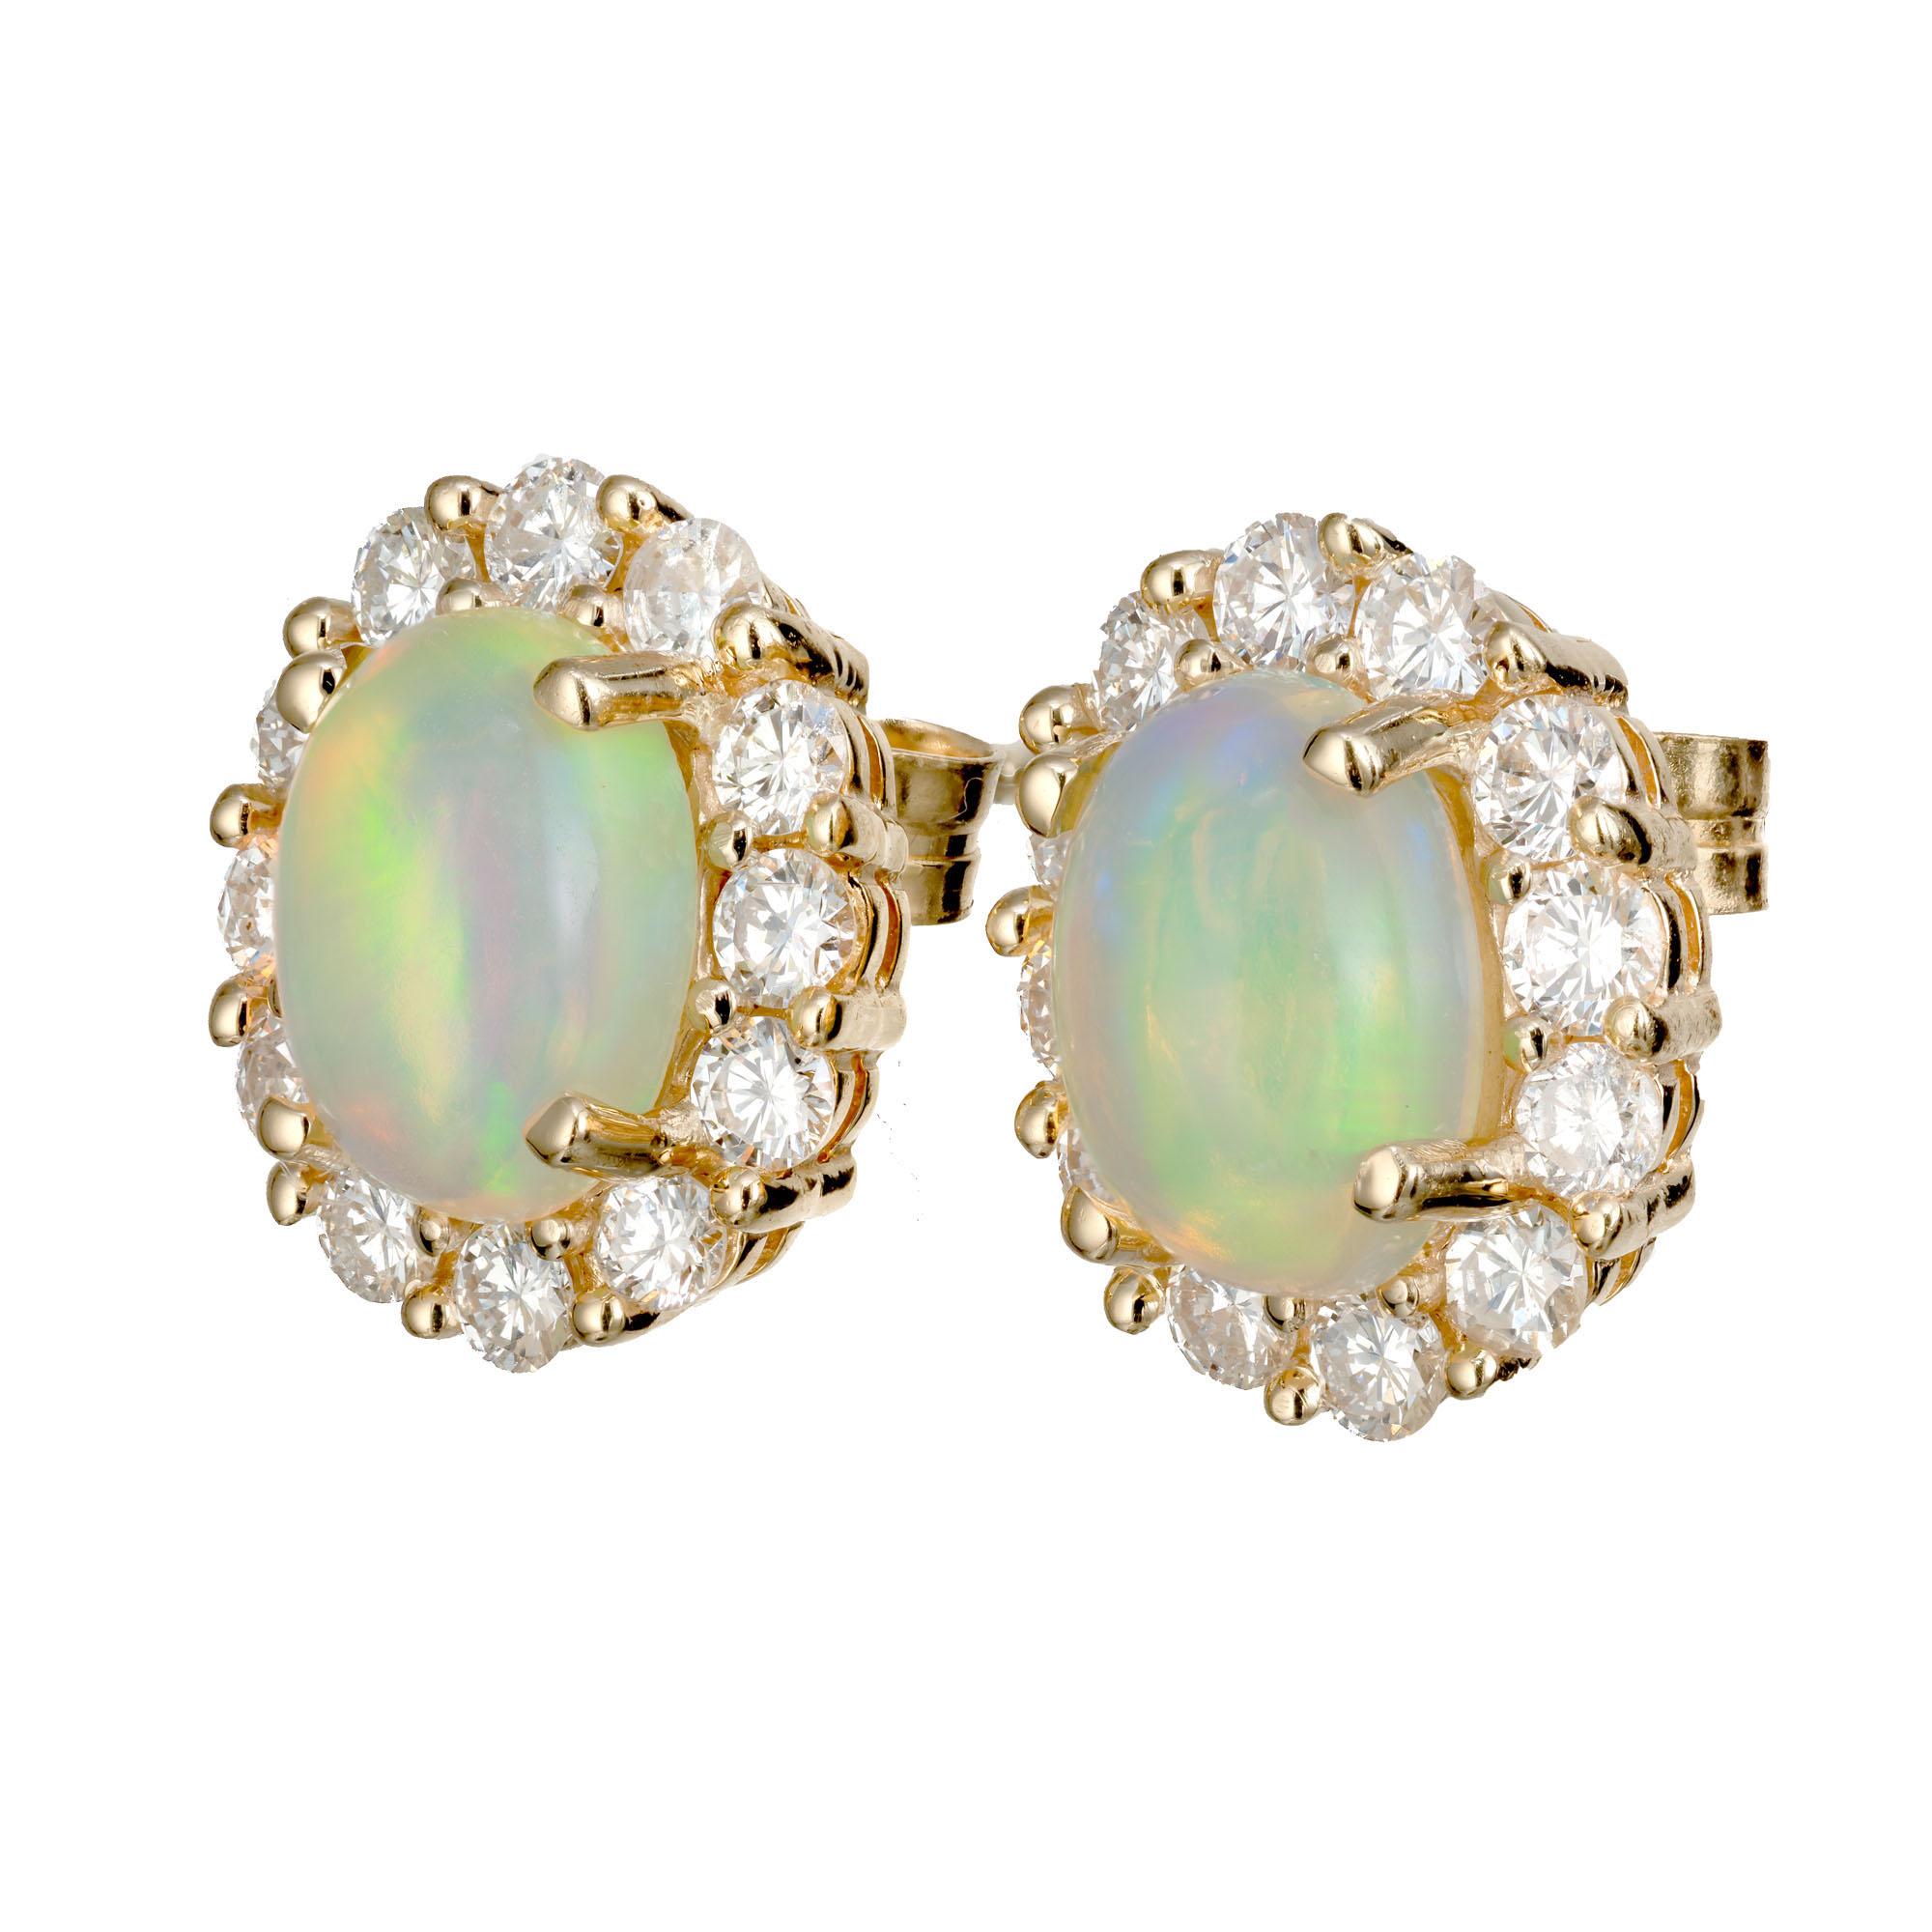 Opal and diamond halo earrings. 2 oval cabochon opals with red, blue and green flash set in 14k gold baskets , each with a halo of round brilliant cuts diamonds. Designed and crafted in the Peter Suchy workshop.

2 cabochon opals, approx. 1.71cts
24